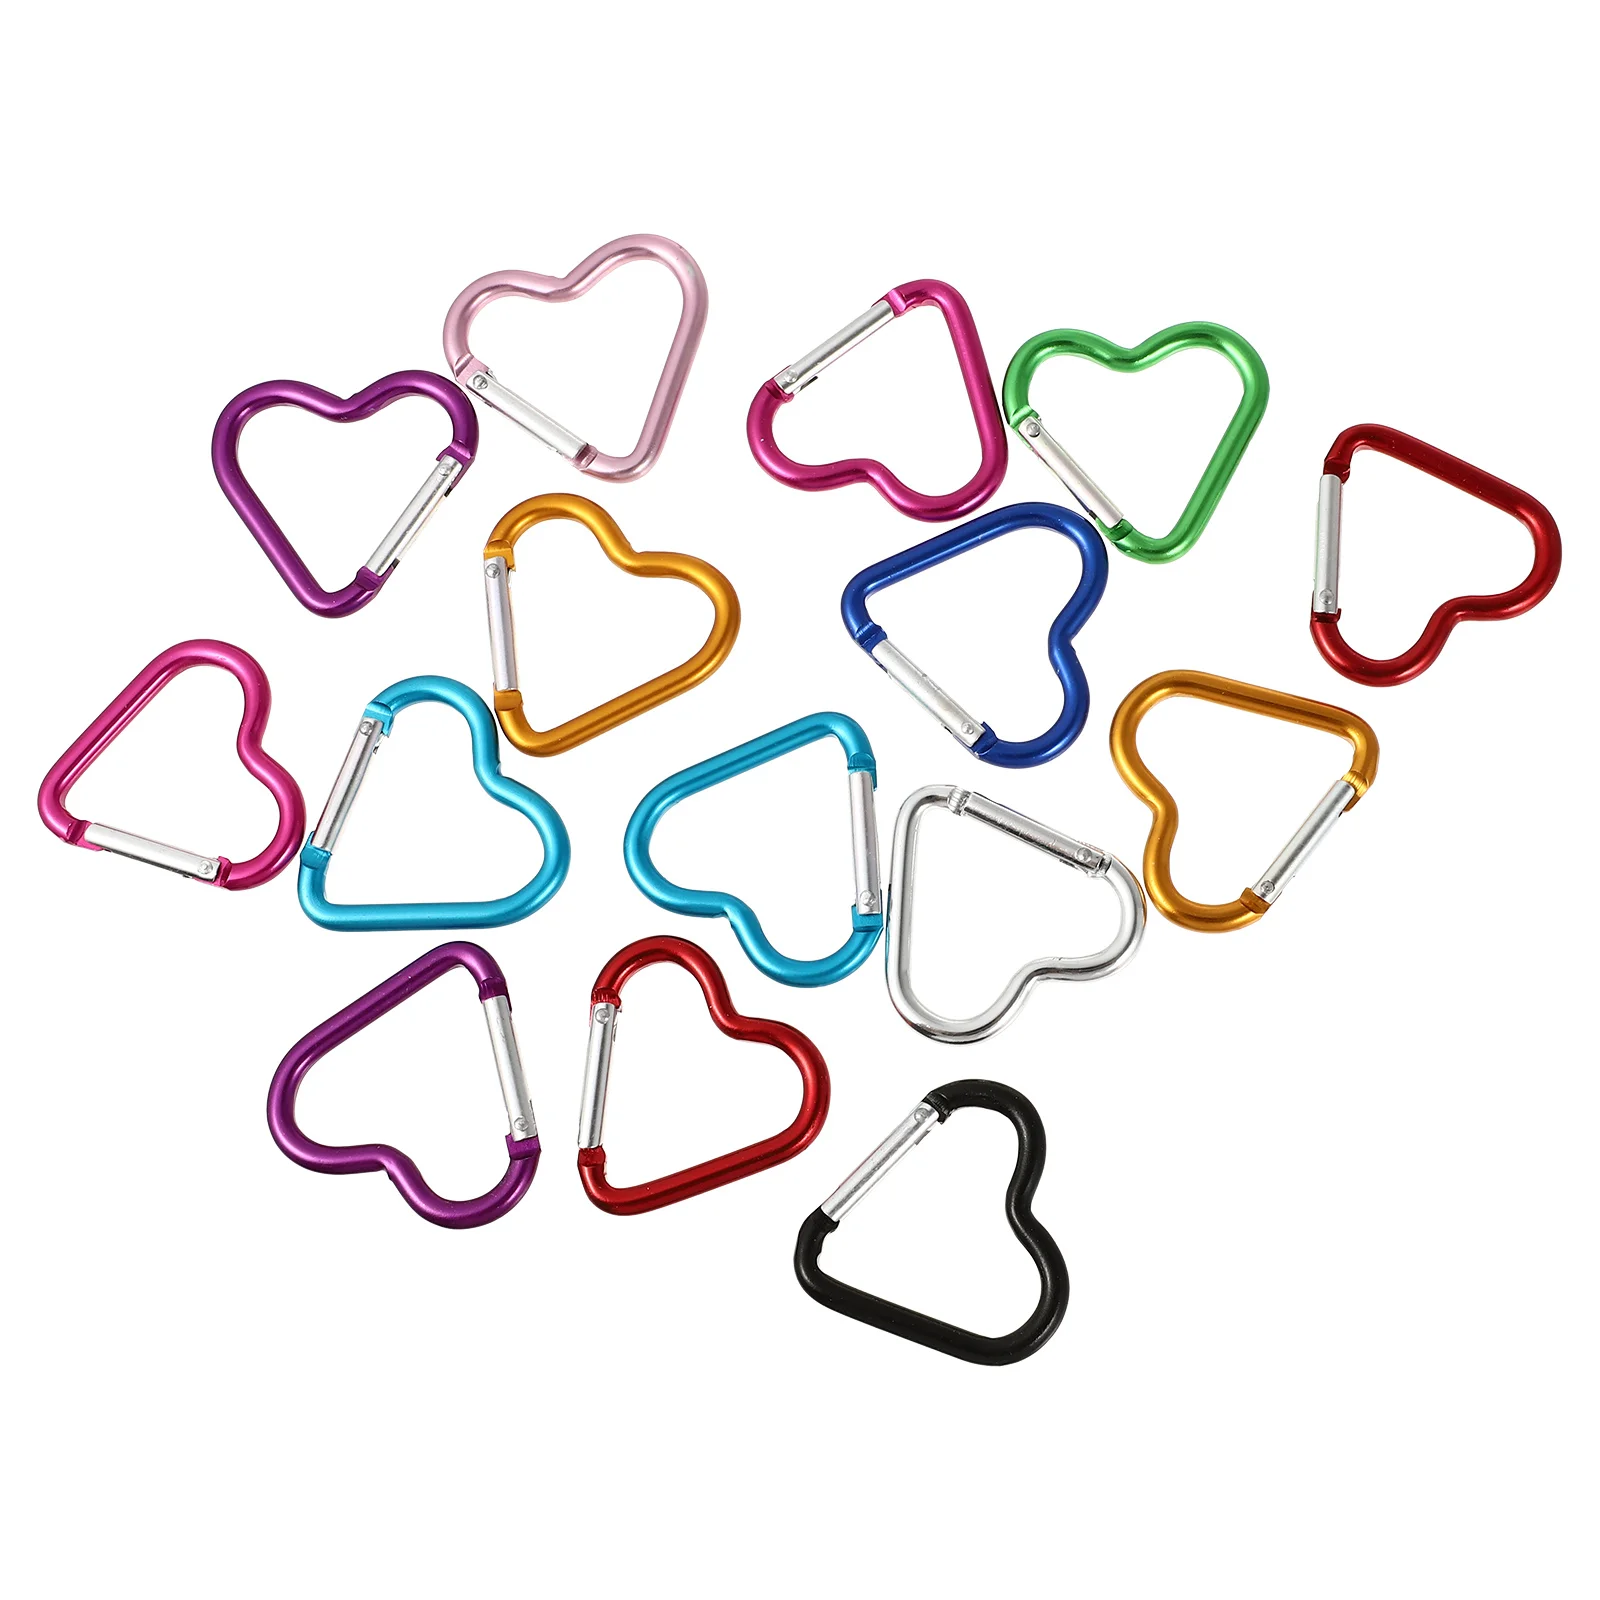 

15pcs Carabiner Clip Heart Shape Key Chain Clip Hook Backpacking Locking Clips Replacement